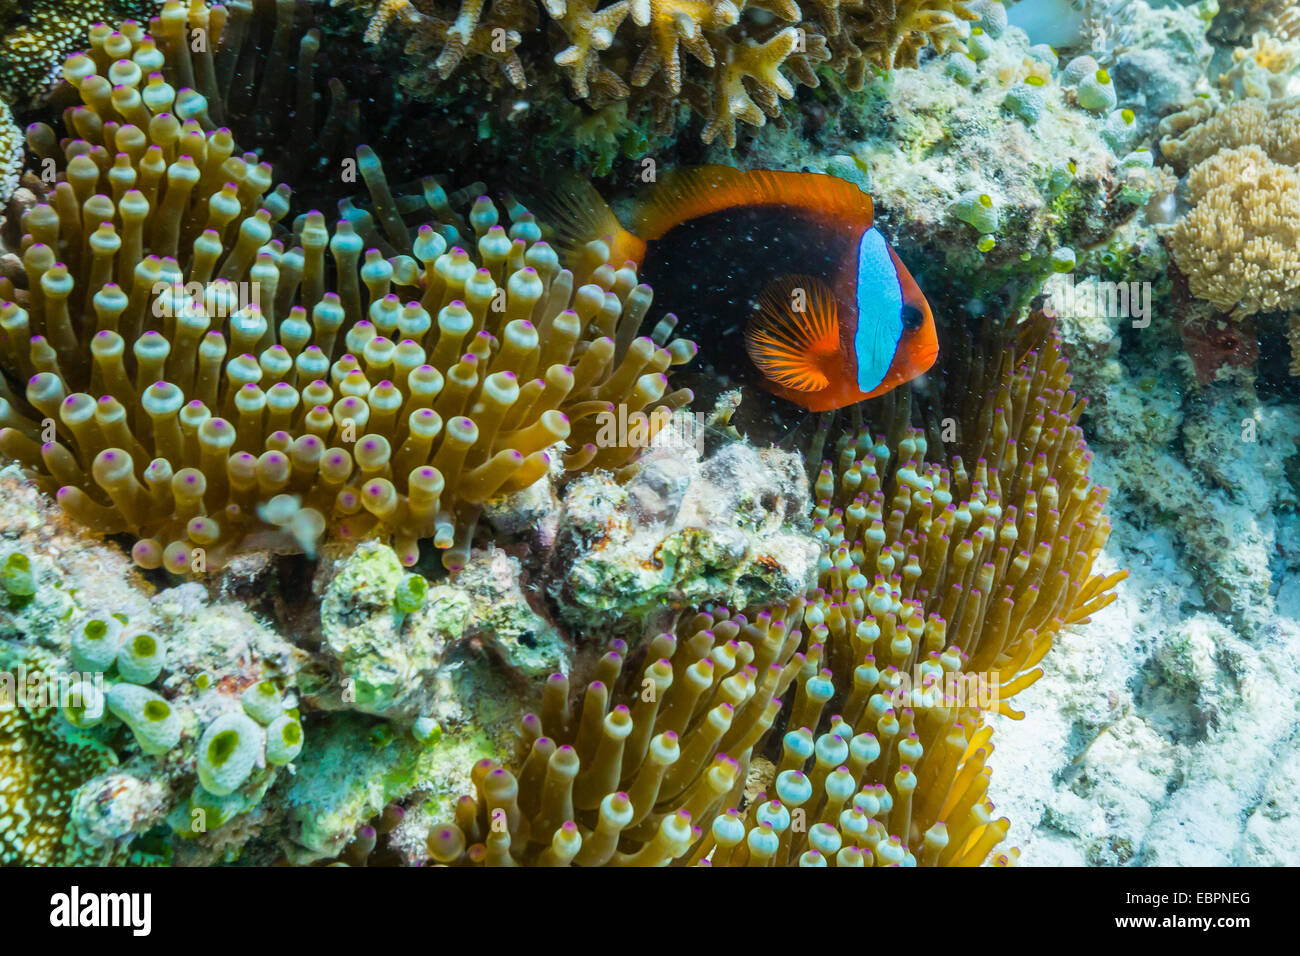 Anemonefish in anemone on underwater reef on Jaco Island, Timor Sea, East Timor, Southeast Asia, Asia Stock Photo